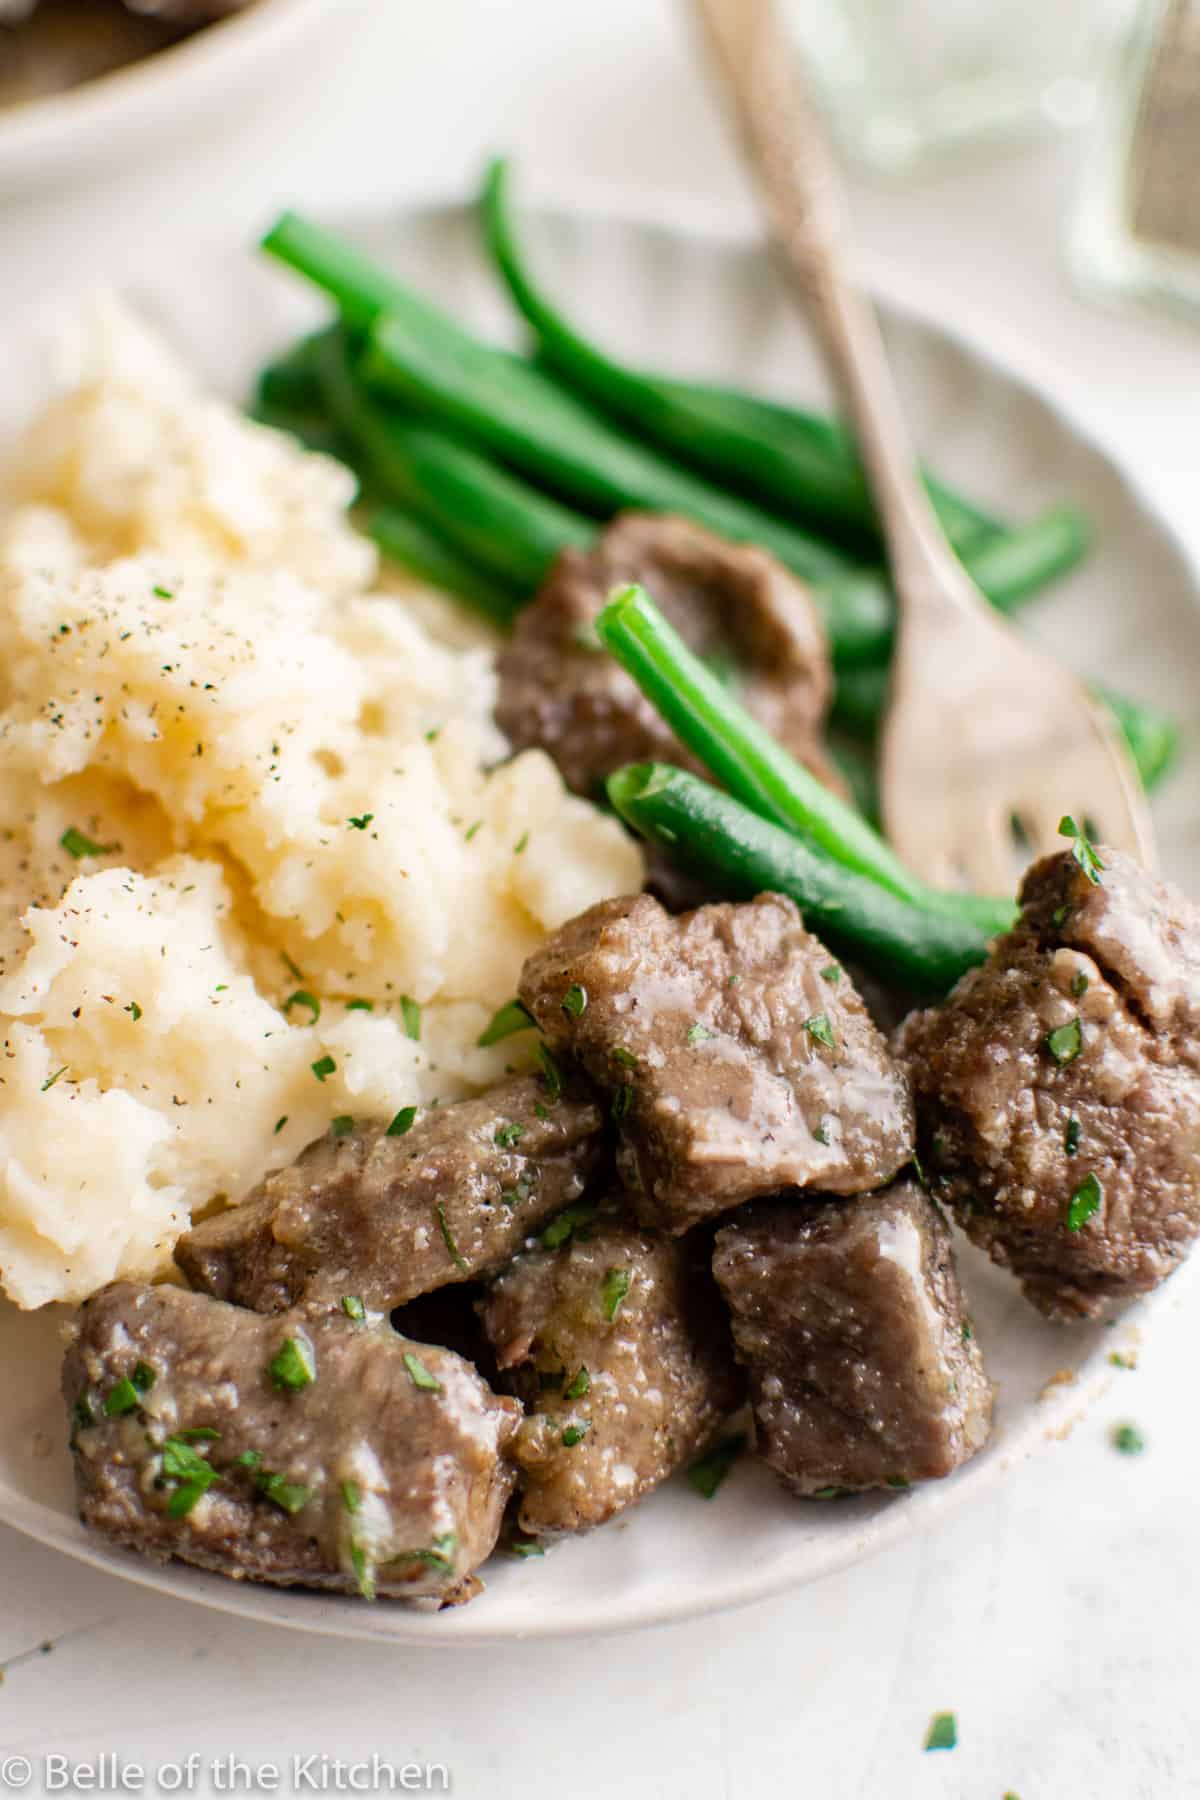 a plate with mashed potatoes, green beans, and steak